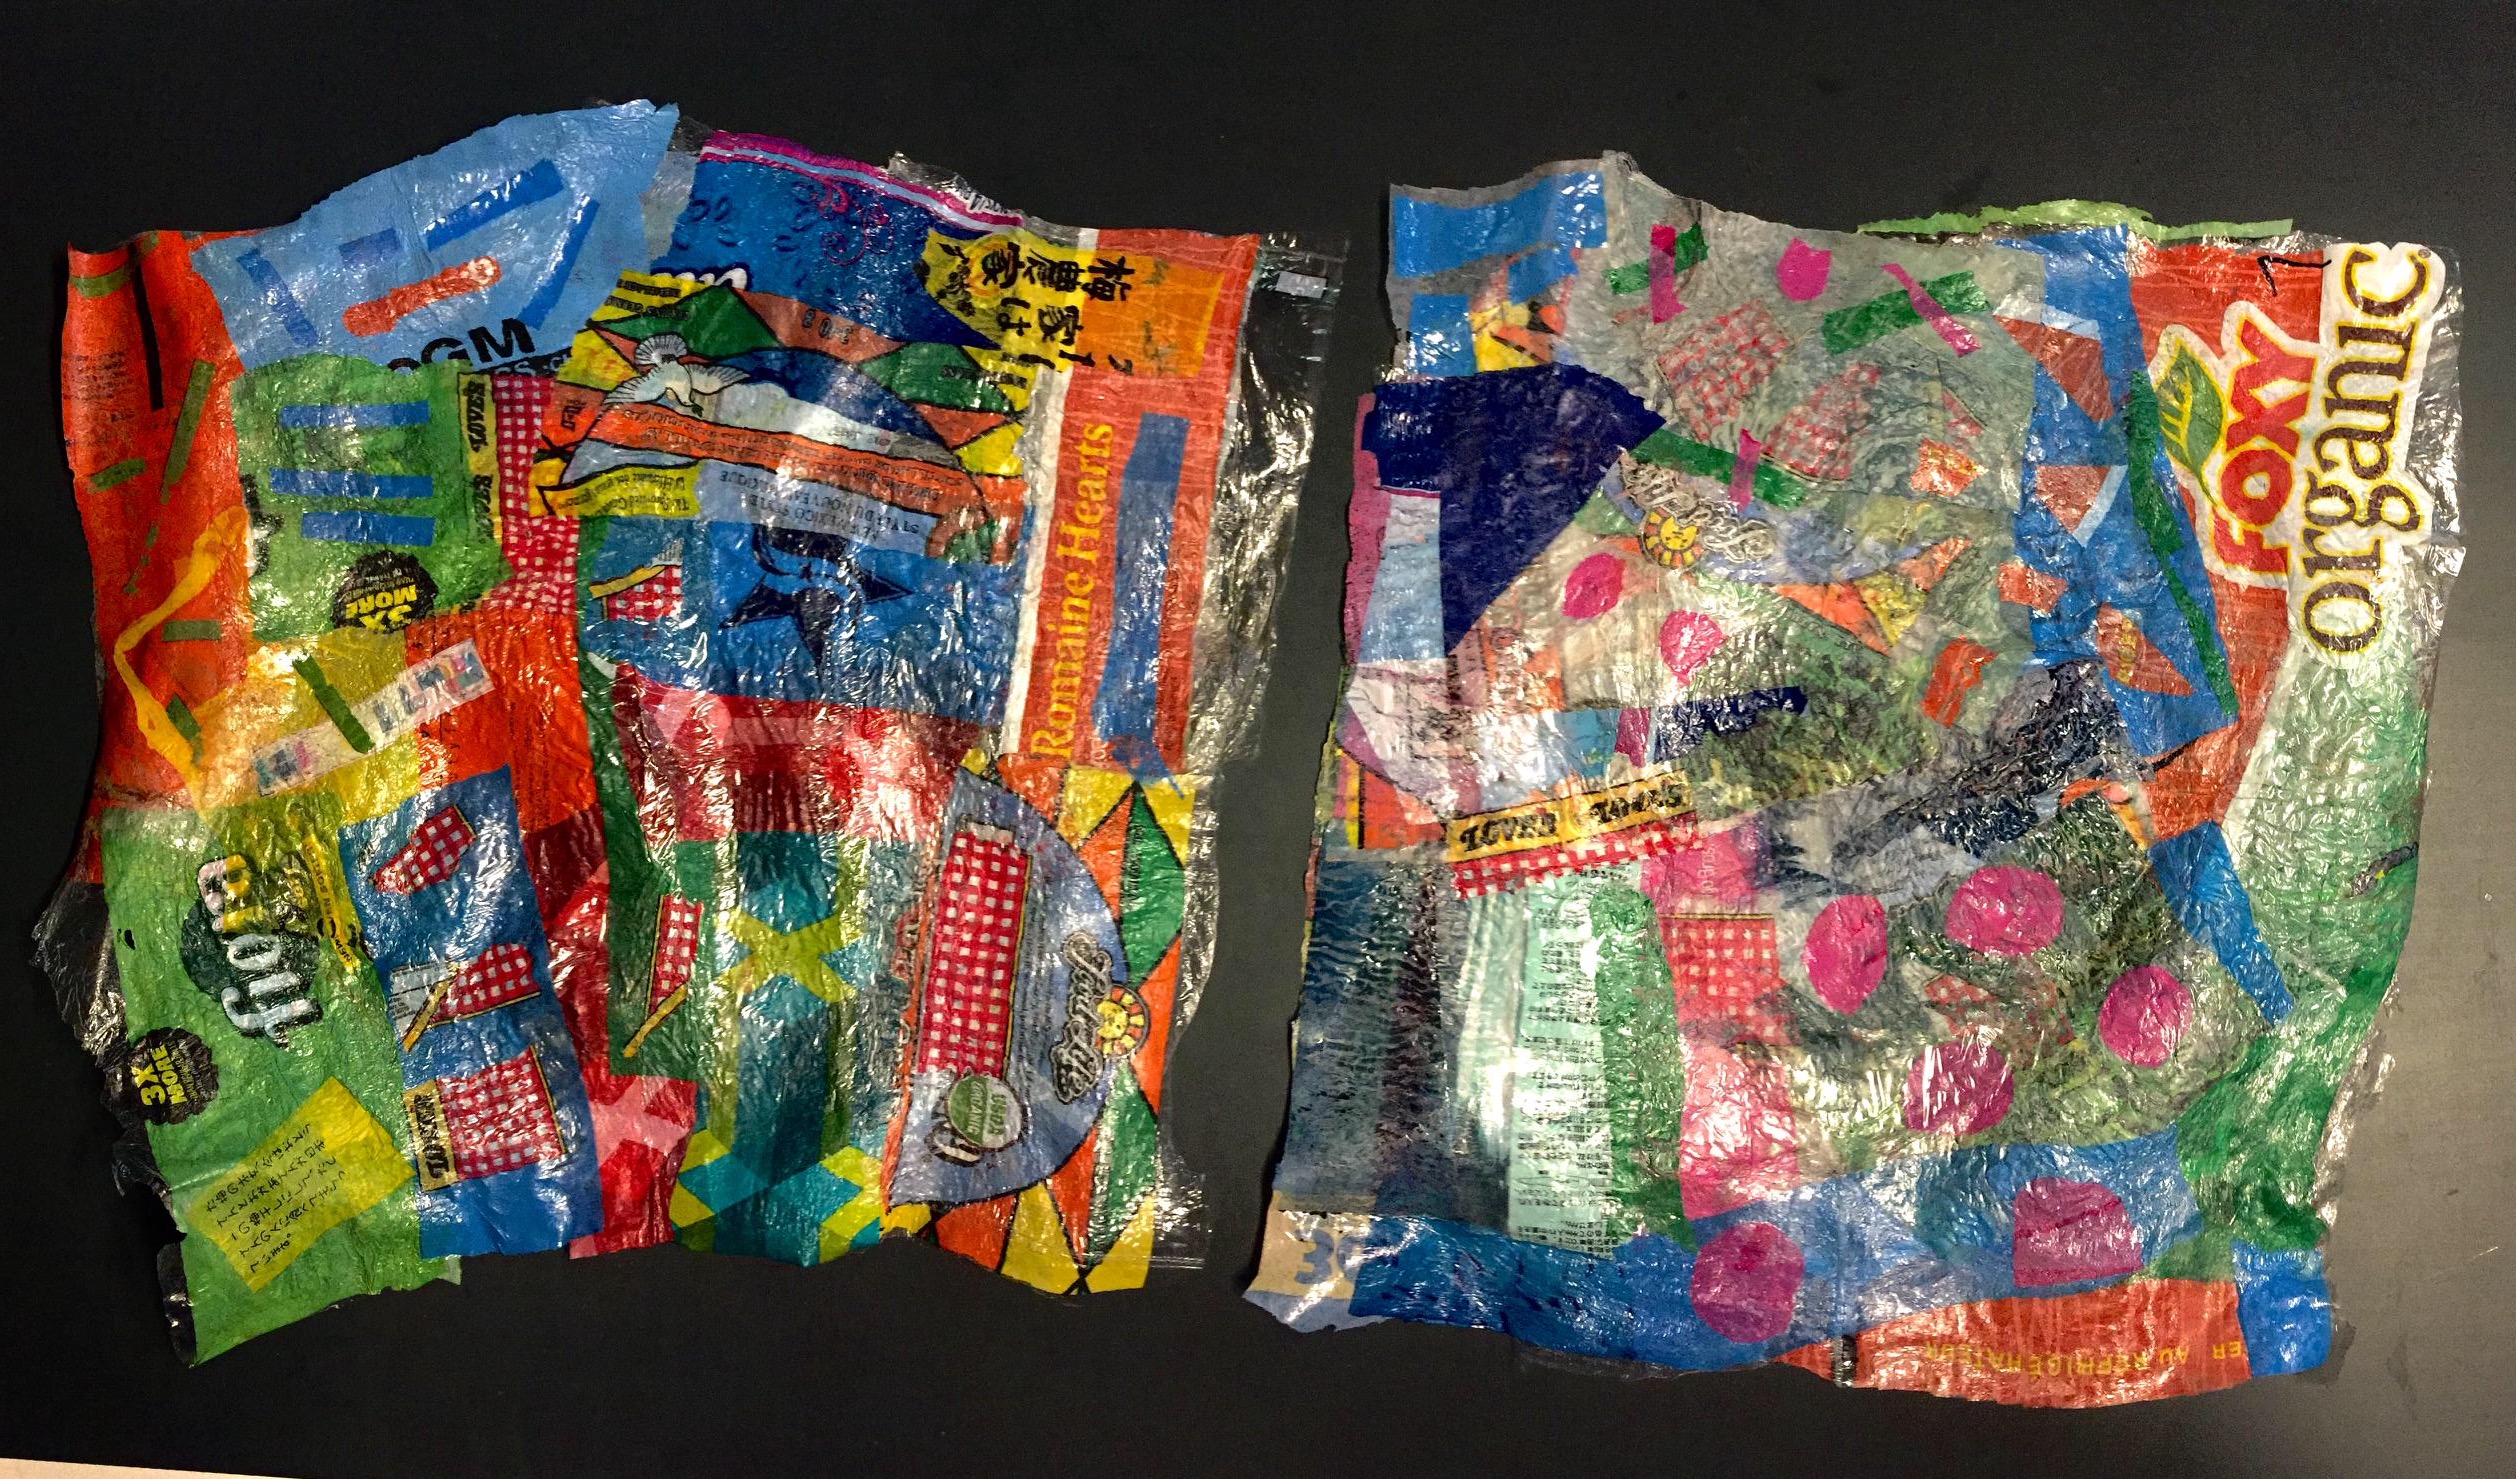 More fun with fused plastic bags!